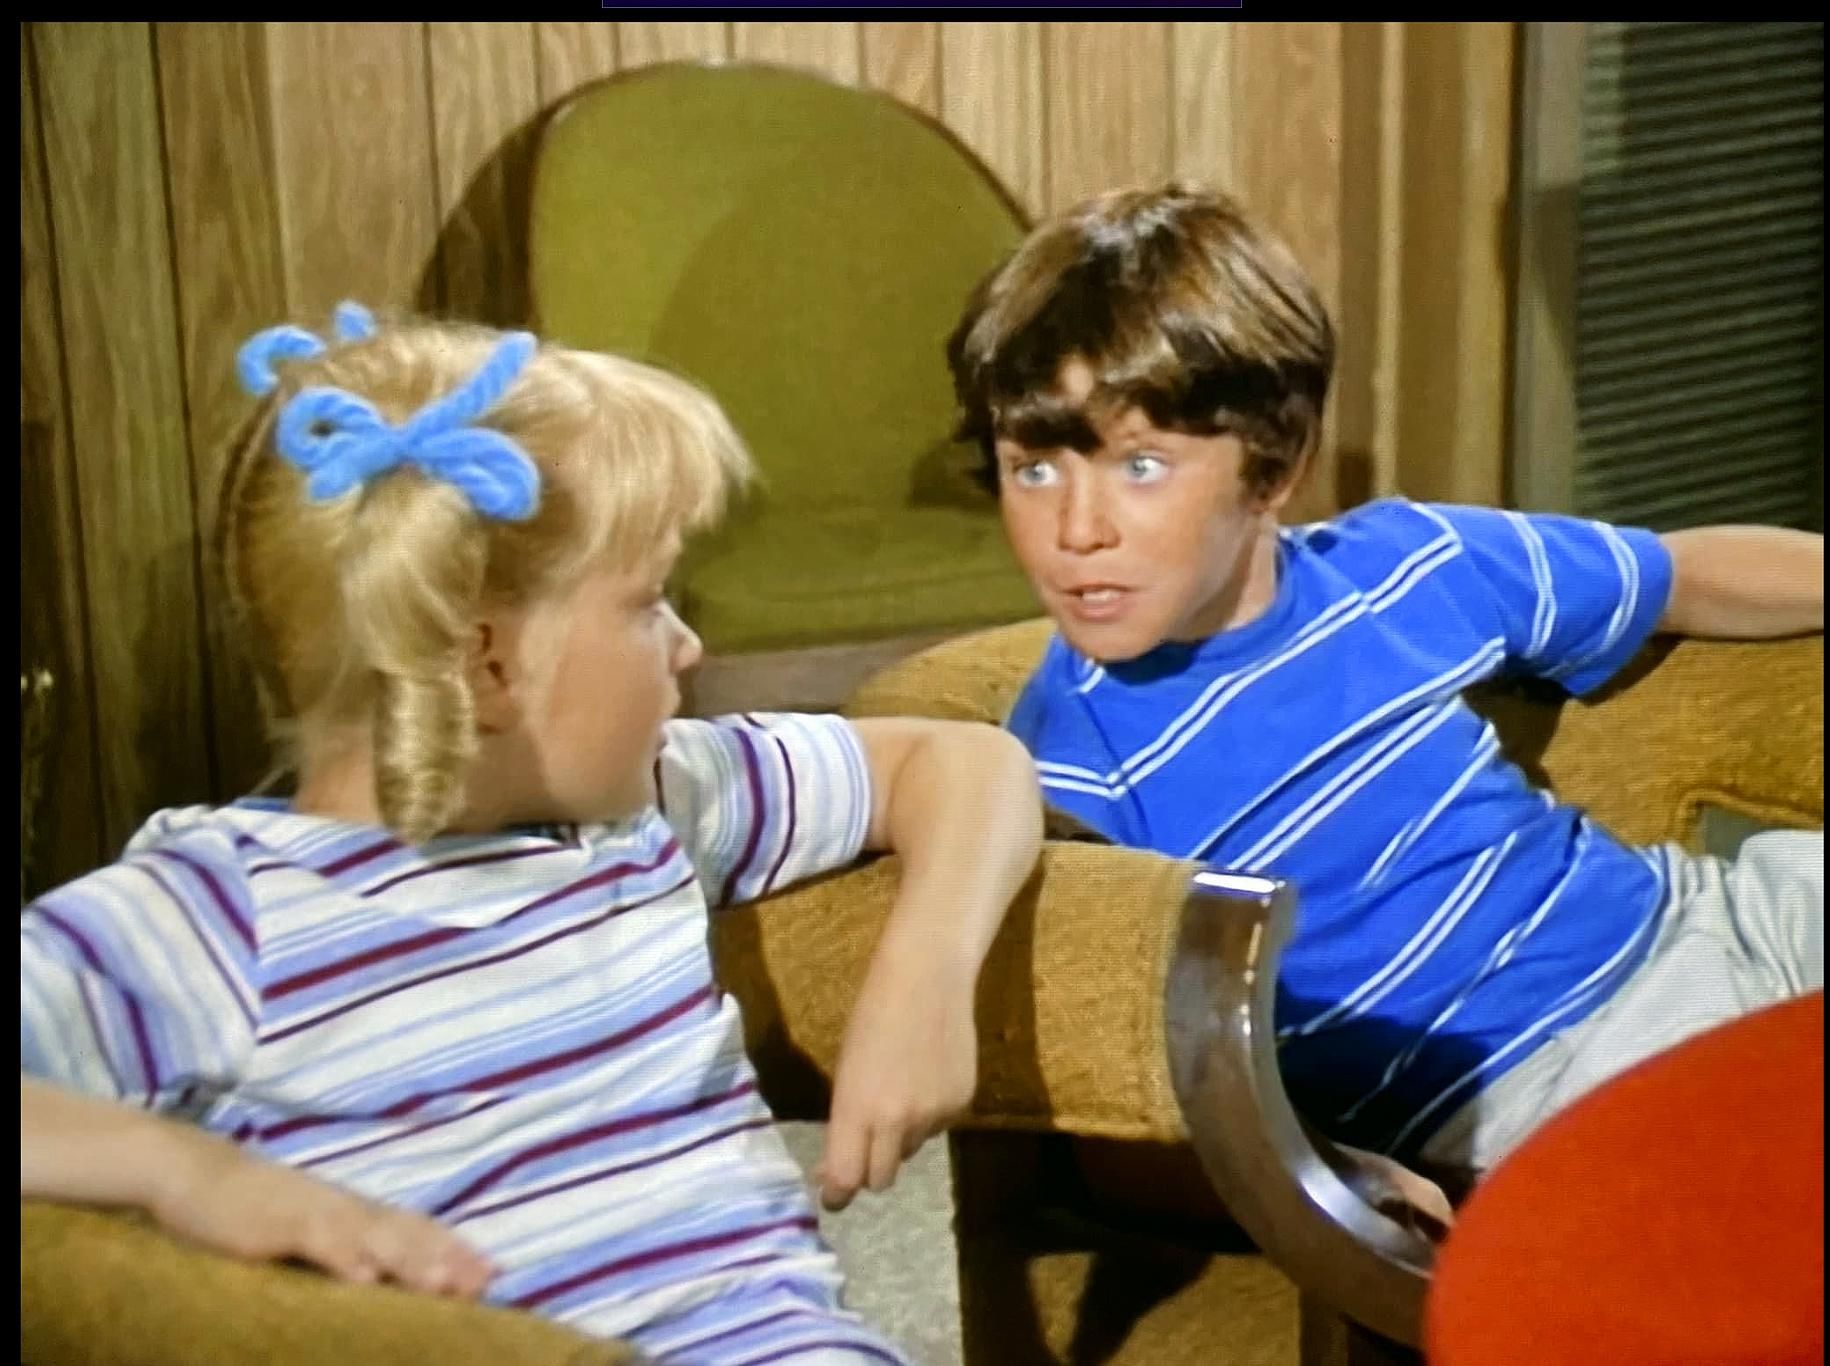 Bobby and Cindy talk excitedly in the rec room of the Brady House